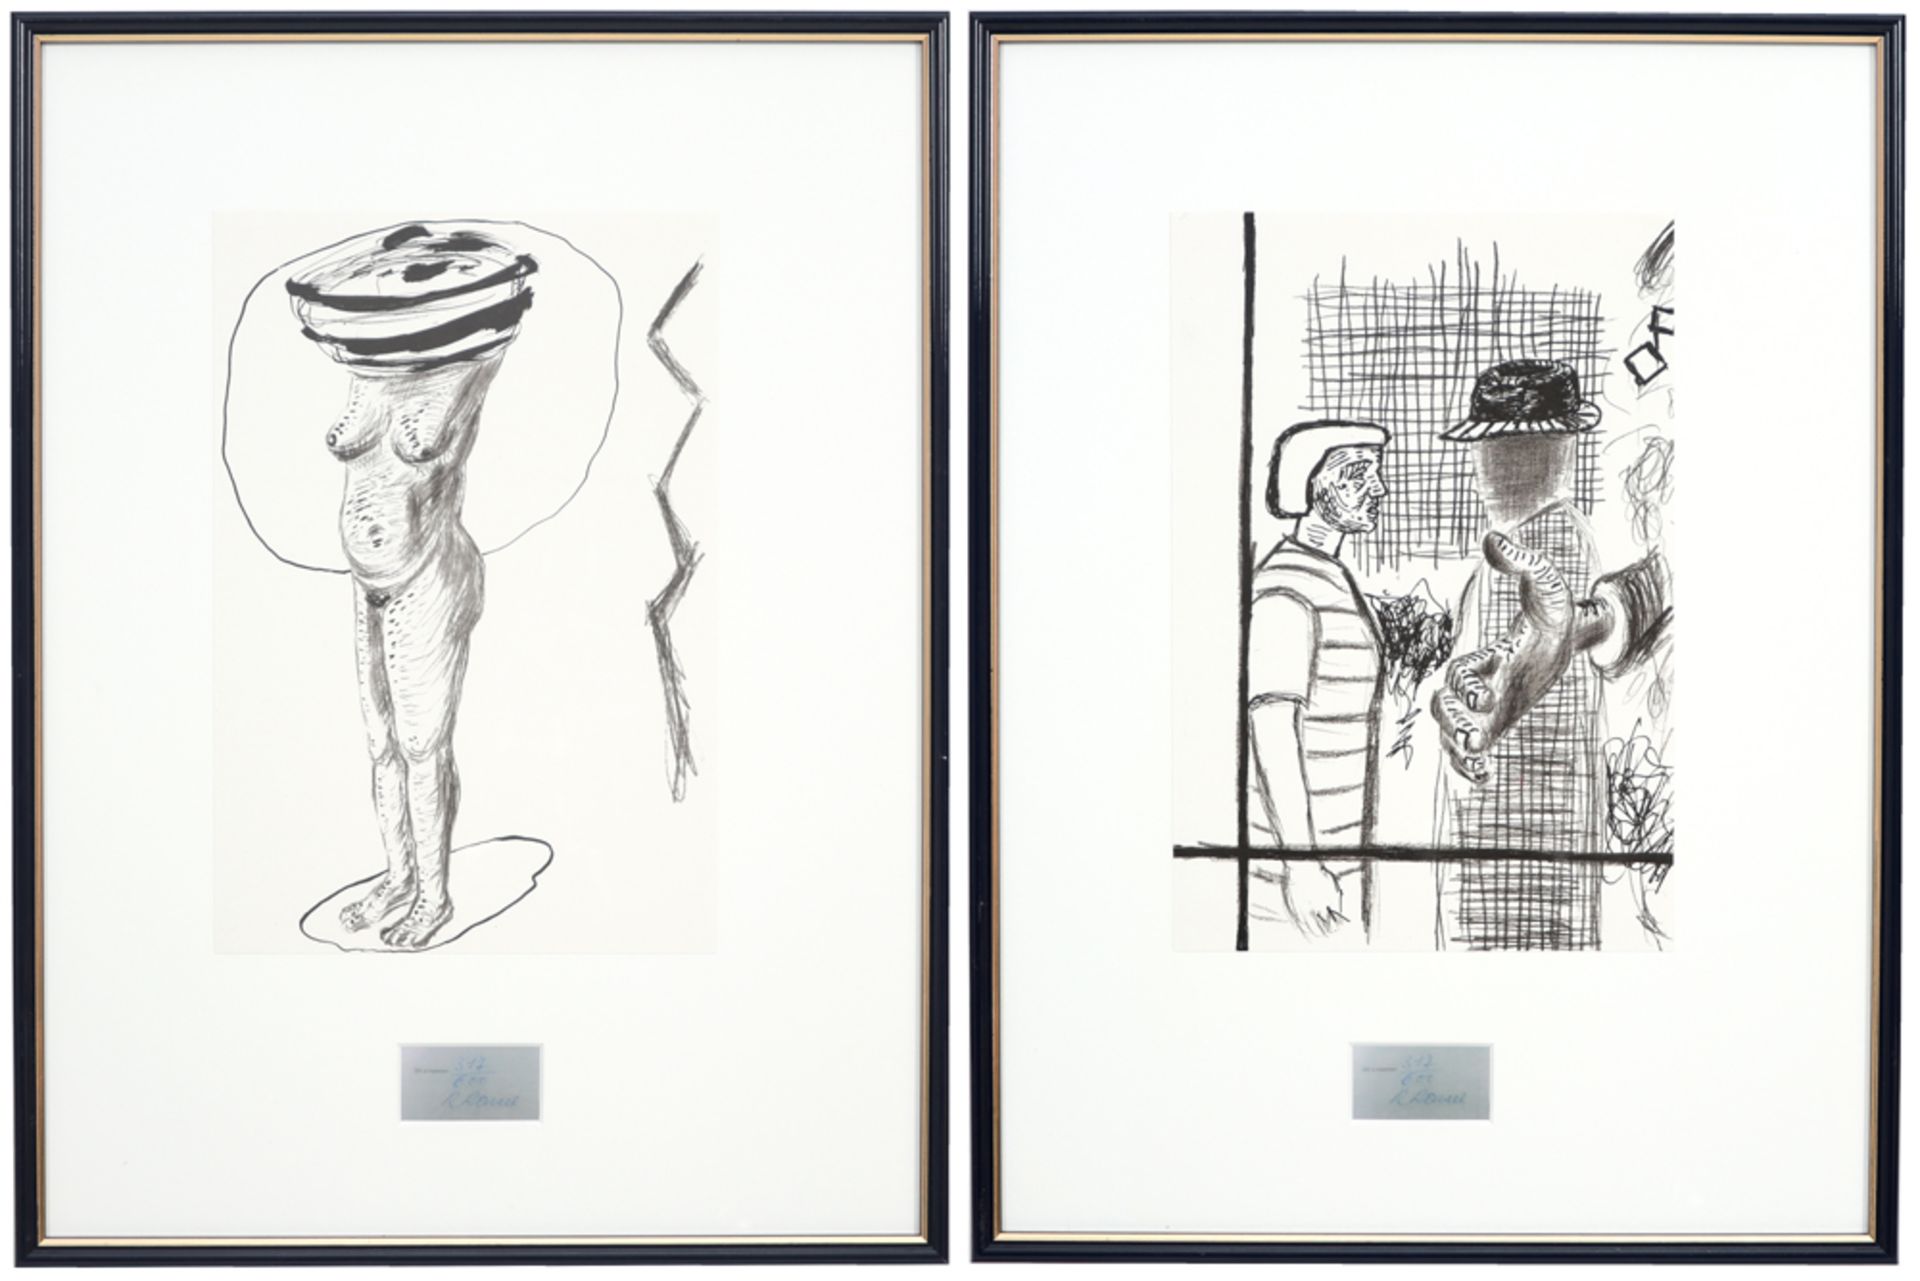 two Roger Raveel prints from the eight book of the Series 1981, edited by "Kalamiteit" || RAVEEL